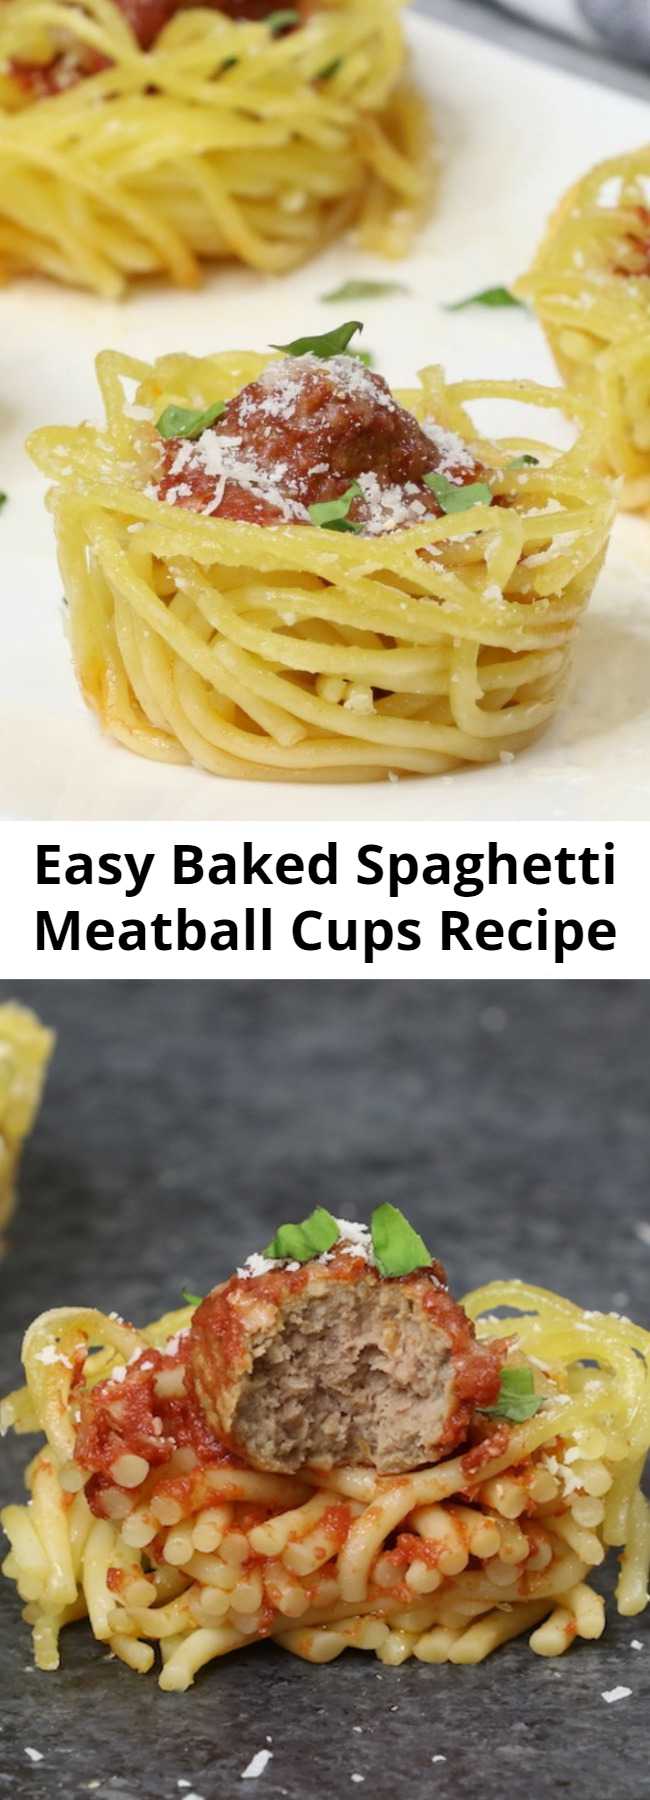 Easy Baked Spaghetti Meatball Cups Recipe - Baked Spaghetti and Meatball Cups are a flavorful bite-size appetizer that's fun to make and share, plus they're a fabulous way to use up leftover spaghetti. All you need is some pasta sauce, meatballs, parmesan cheese and an optional egg to hold them together. Easy to make ahead of time for a party.